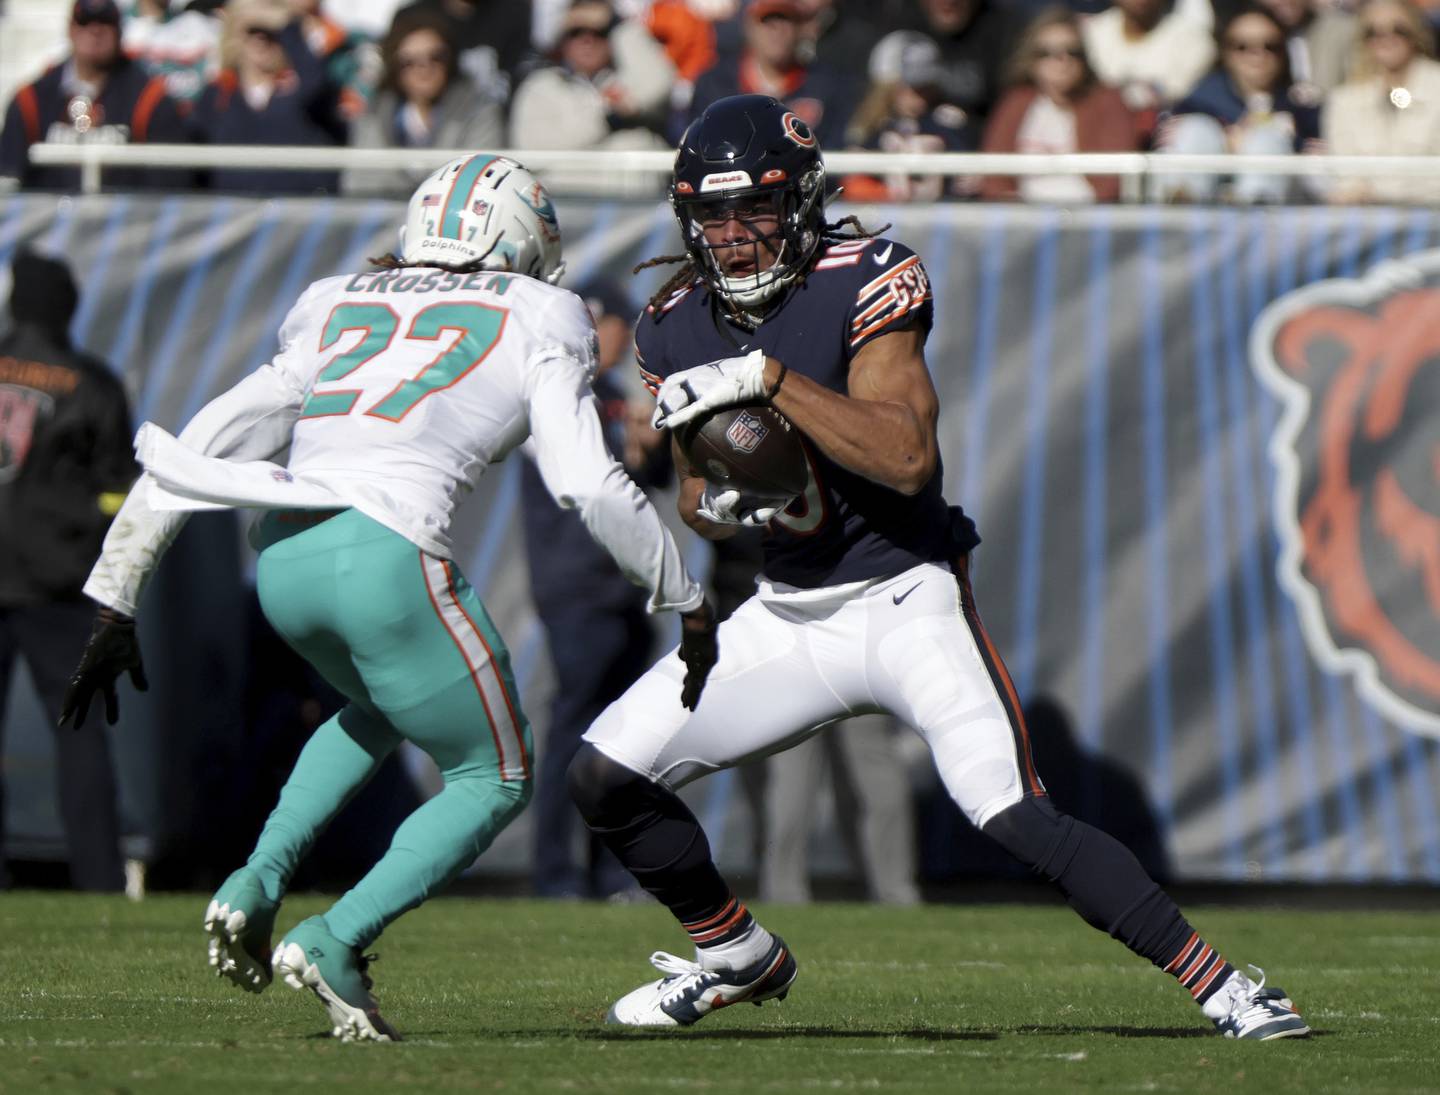 After catching a pass, Bears wide receiver Chase Claypool fakes out Dolphins cornerback Keion Crossen and runs for a first down on Nov. 6 at Soldier Field. 